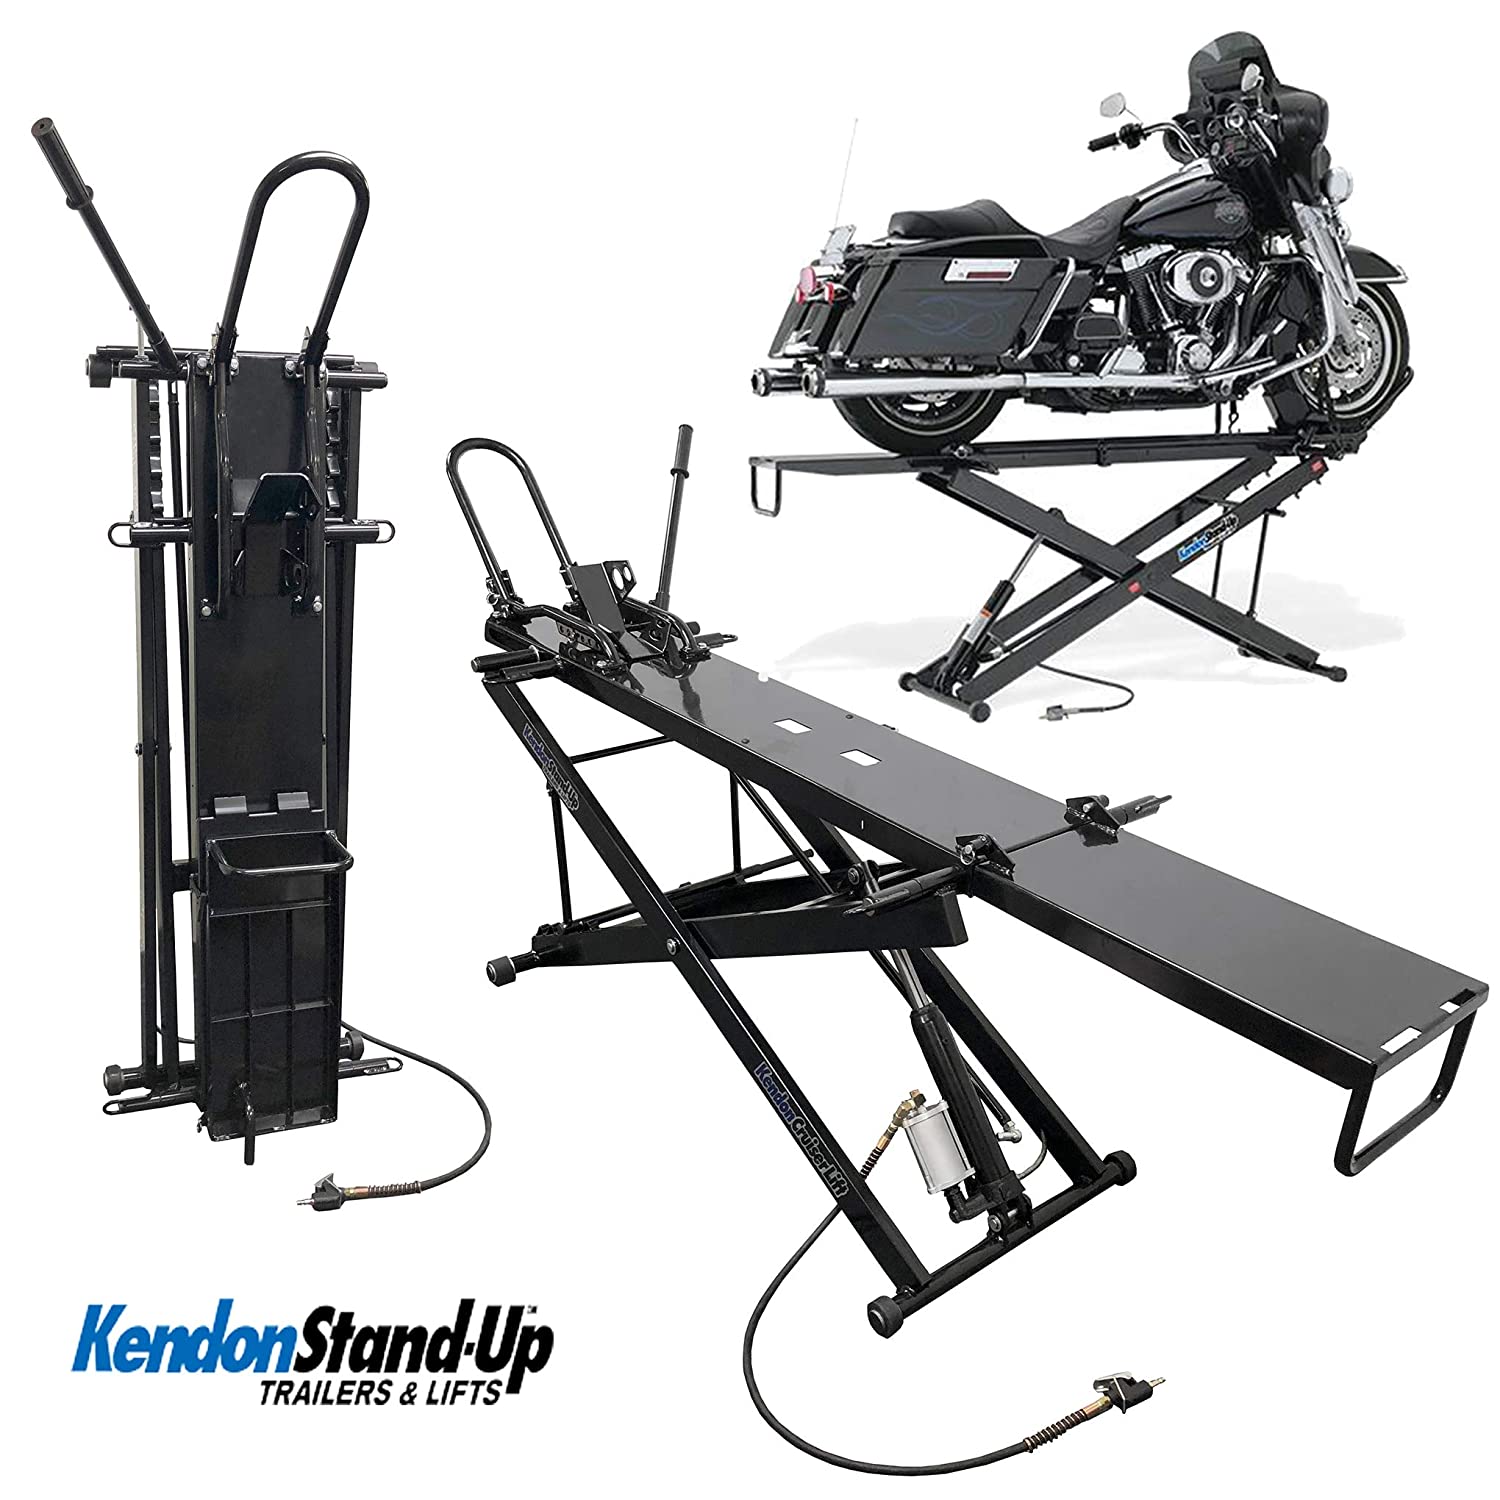 Kendon Folding Stand-Up ATV Motorcycle Table Lift For Harley